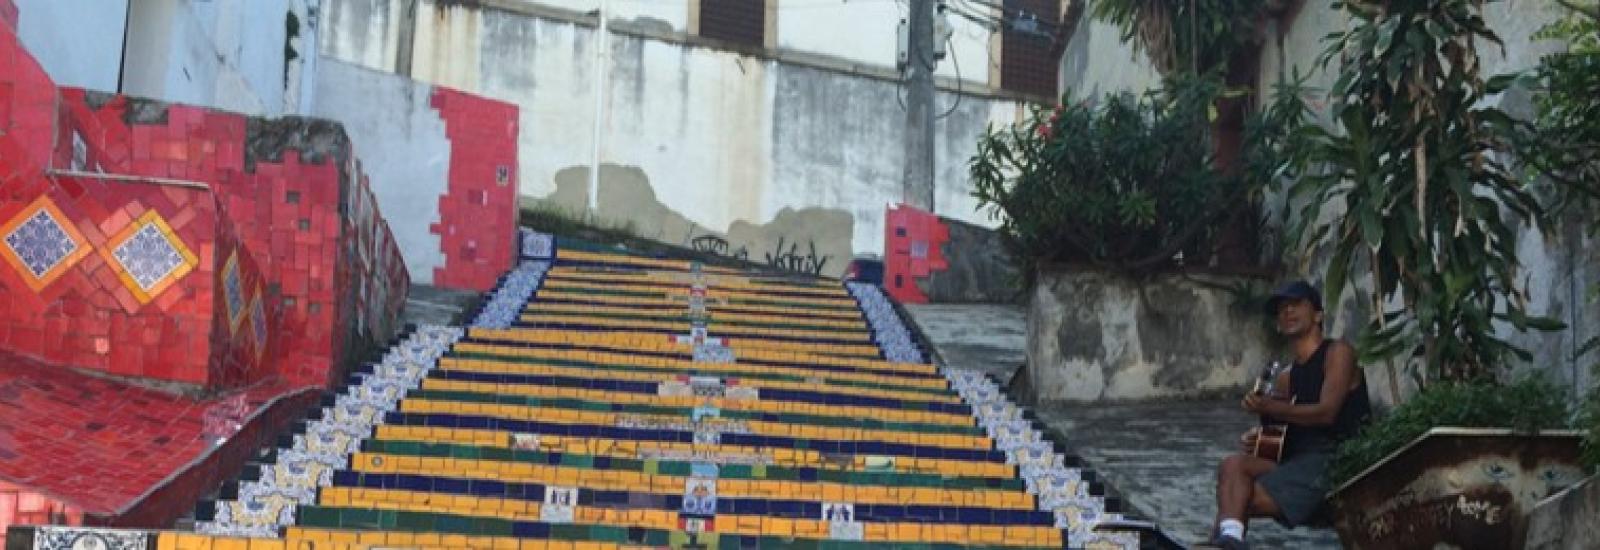 Decorative stairs in Brazil.